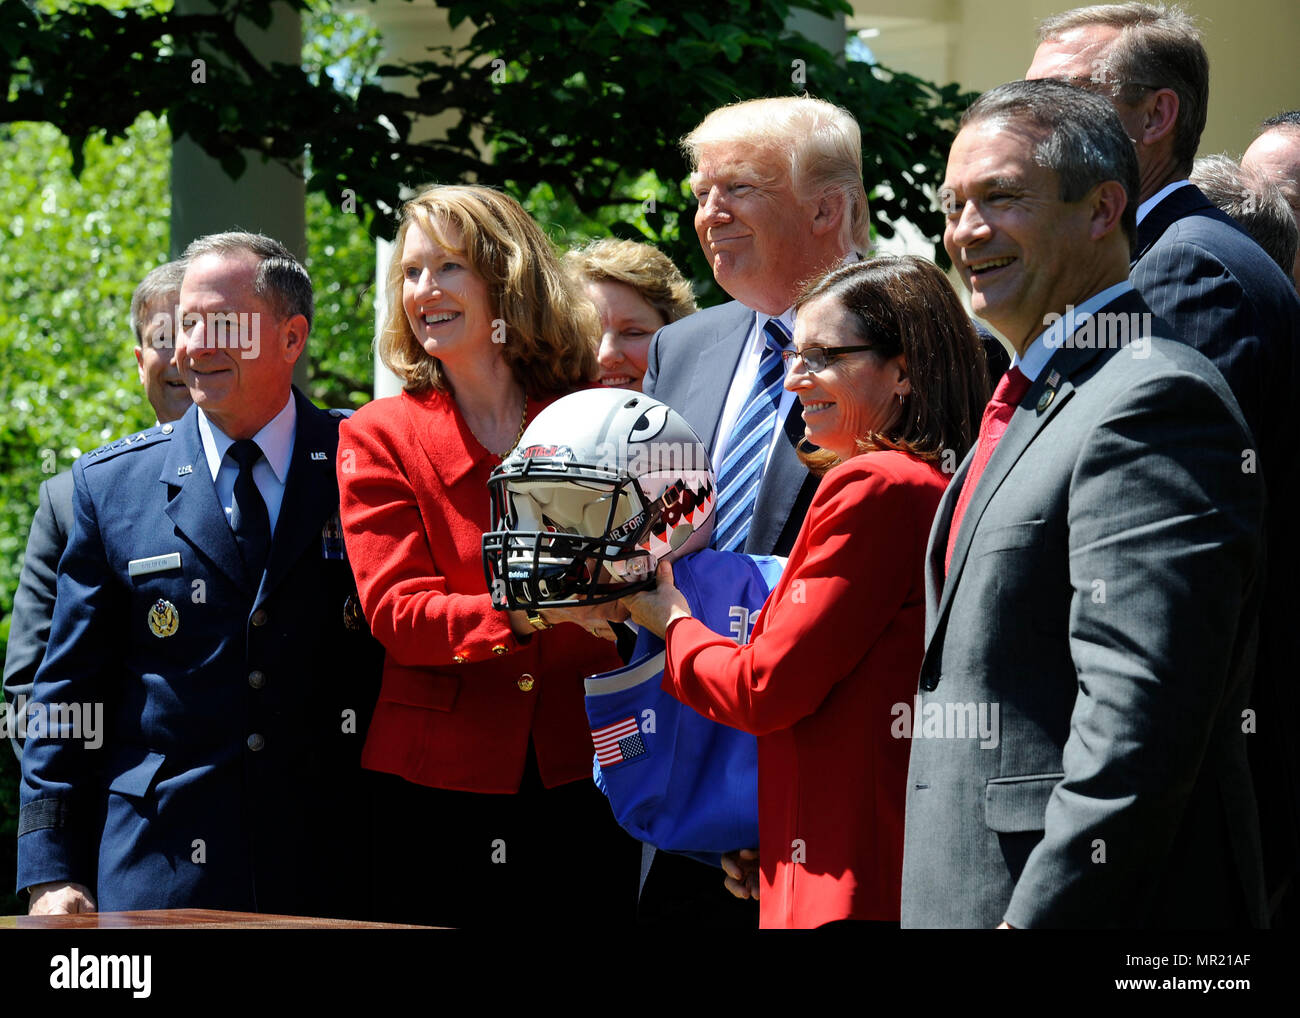 Air Force Chief of Staff Gen. David L. Goldfein, left, and Acting Secretary of the Air Force Lisa S. Disbrow pose for a photo with President Donald Trump at the White House May 2, 2017. Trump congratulated the U.S. Air Force Academy football team with the Commander-in-Chief's Trophy. (U.S. Air Force photo/Staff Sgt. Jannelle McRae) Stock Photo